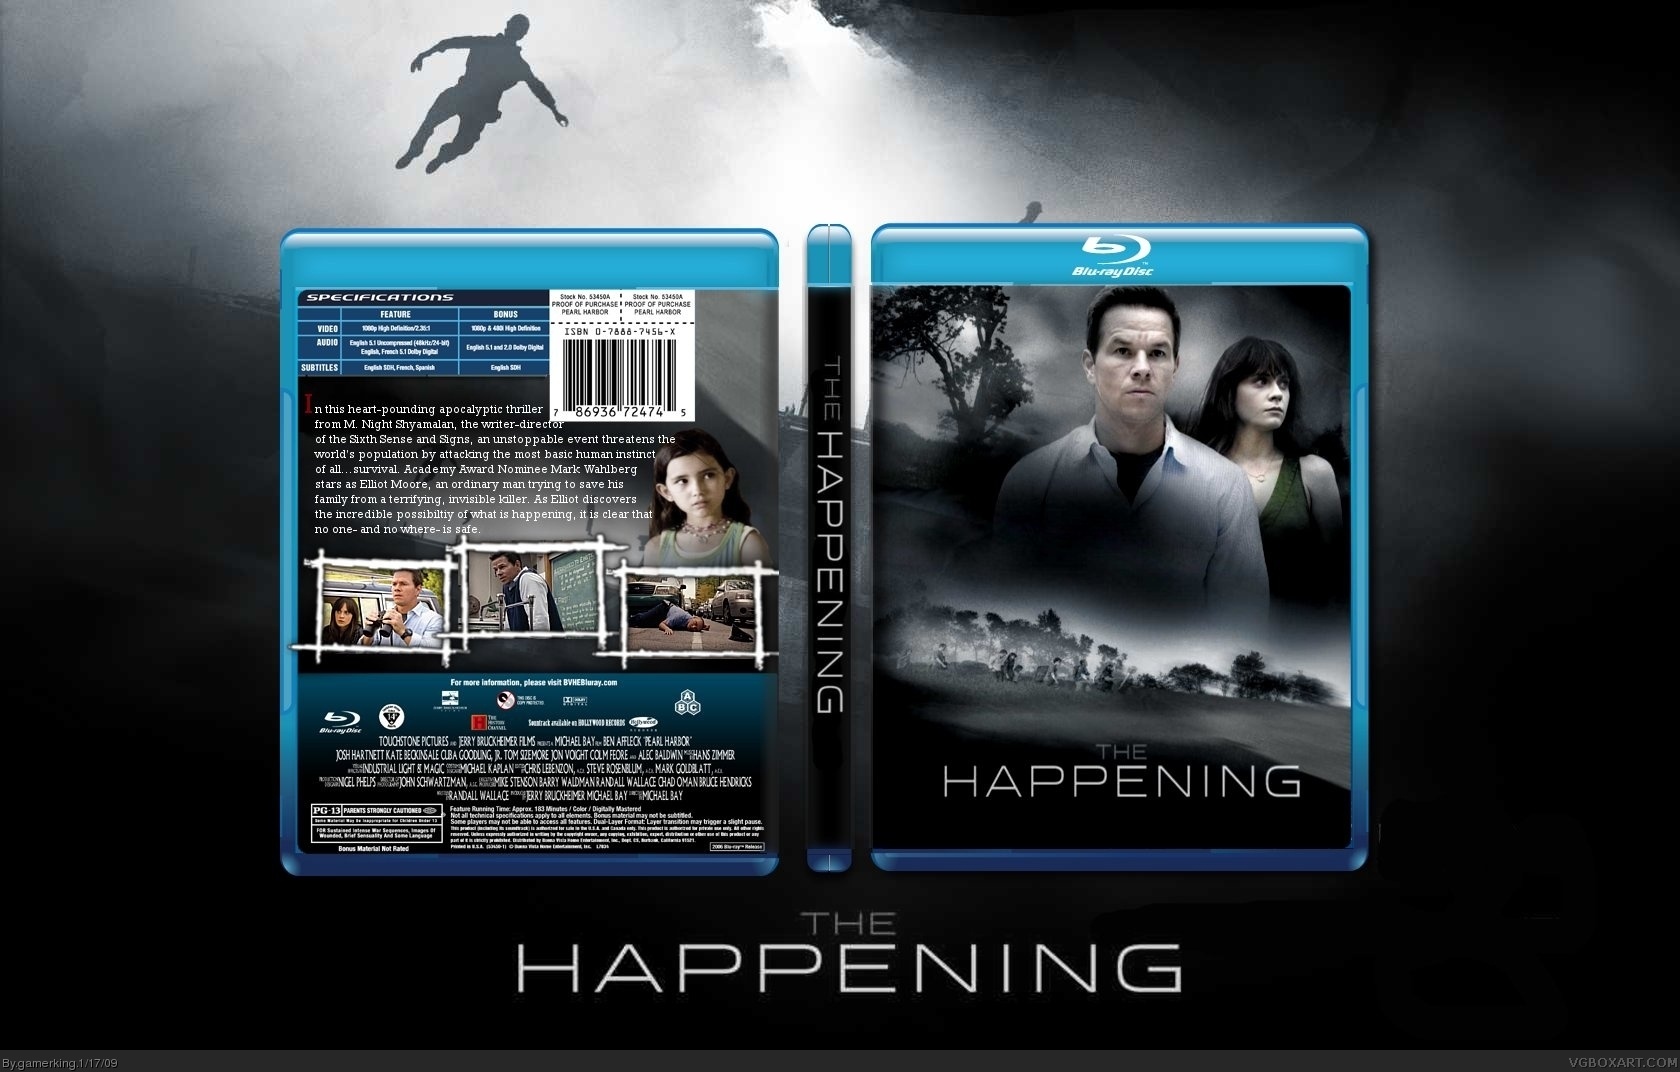 The Happening box cover